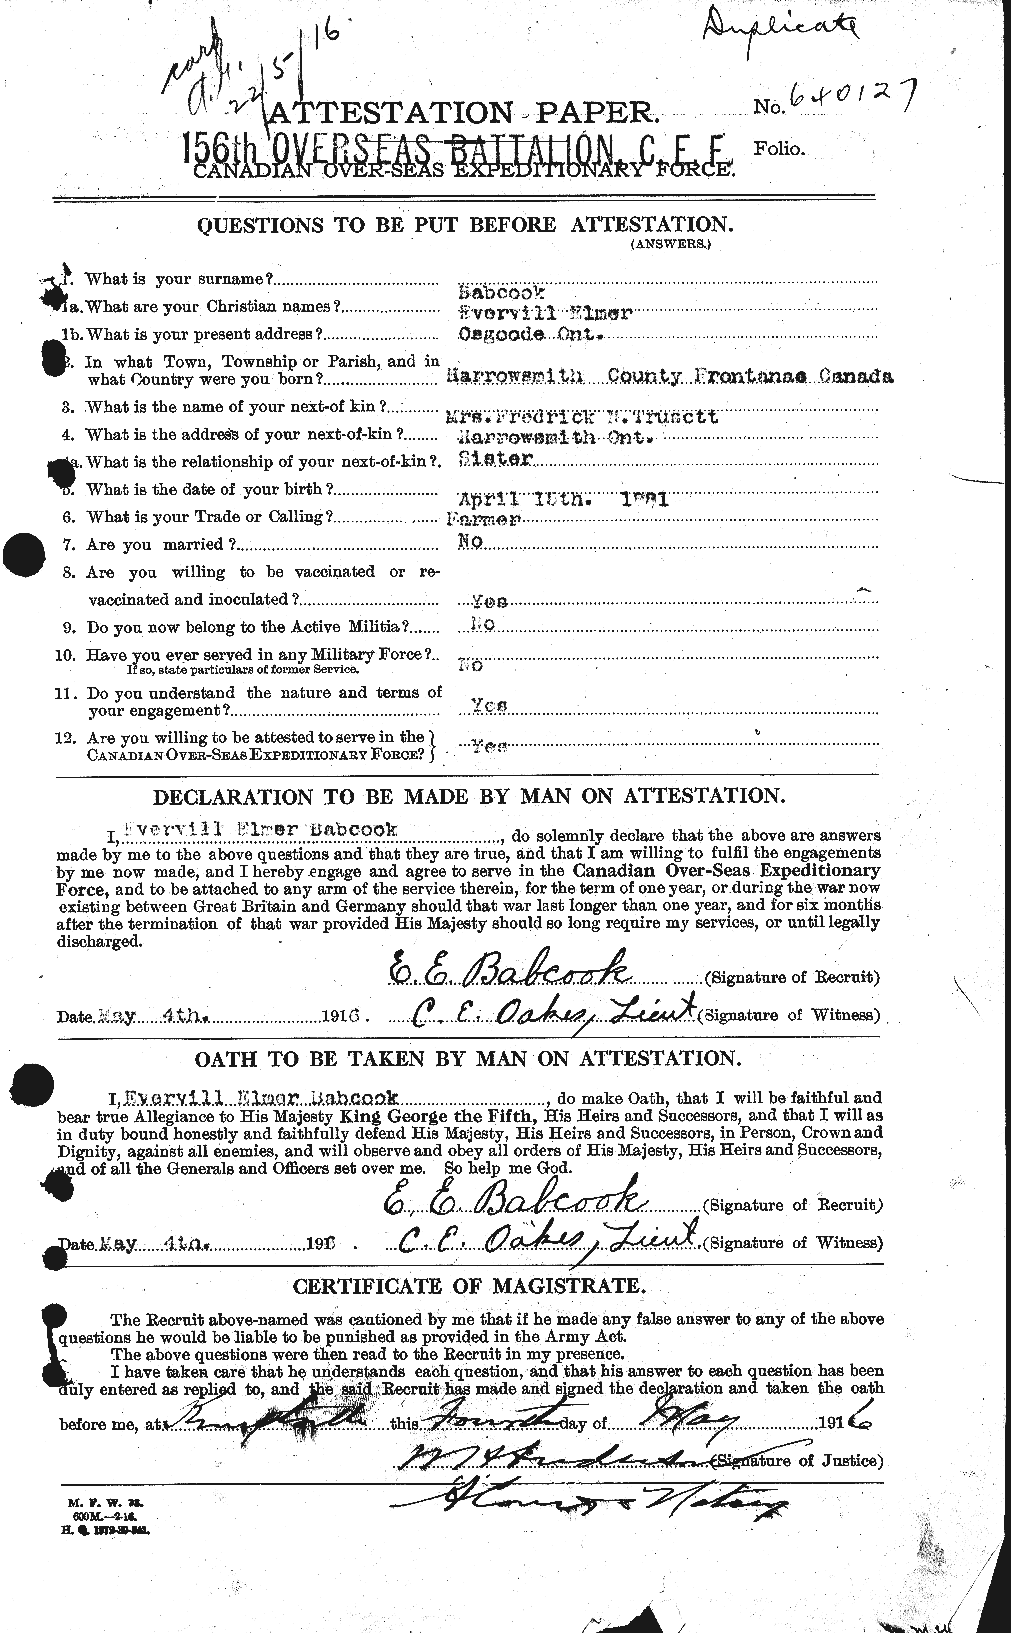 Personnel Records of the First World War - CEF 218244a